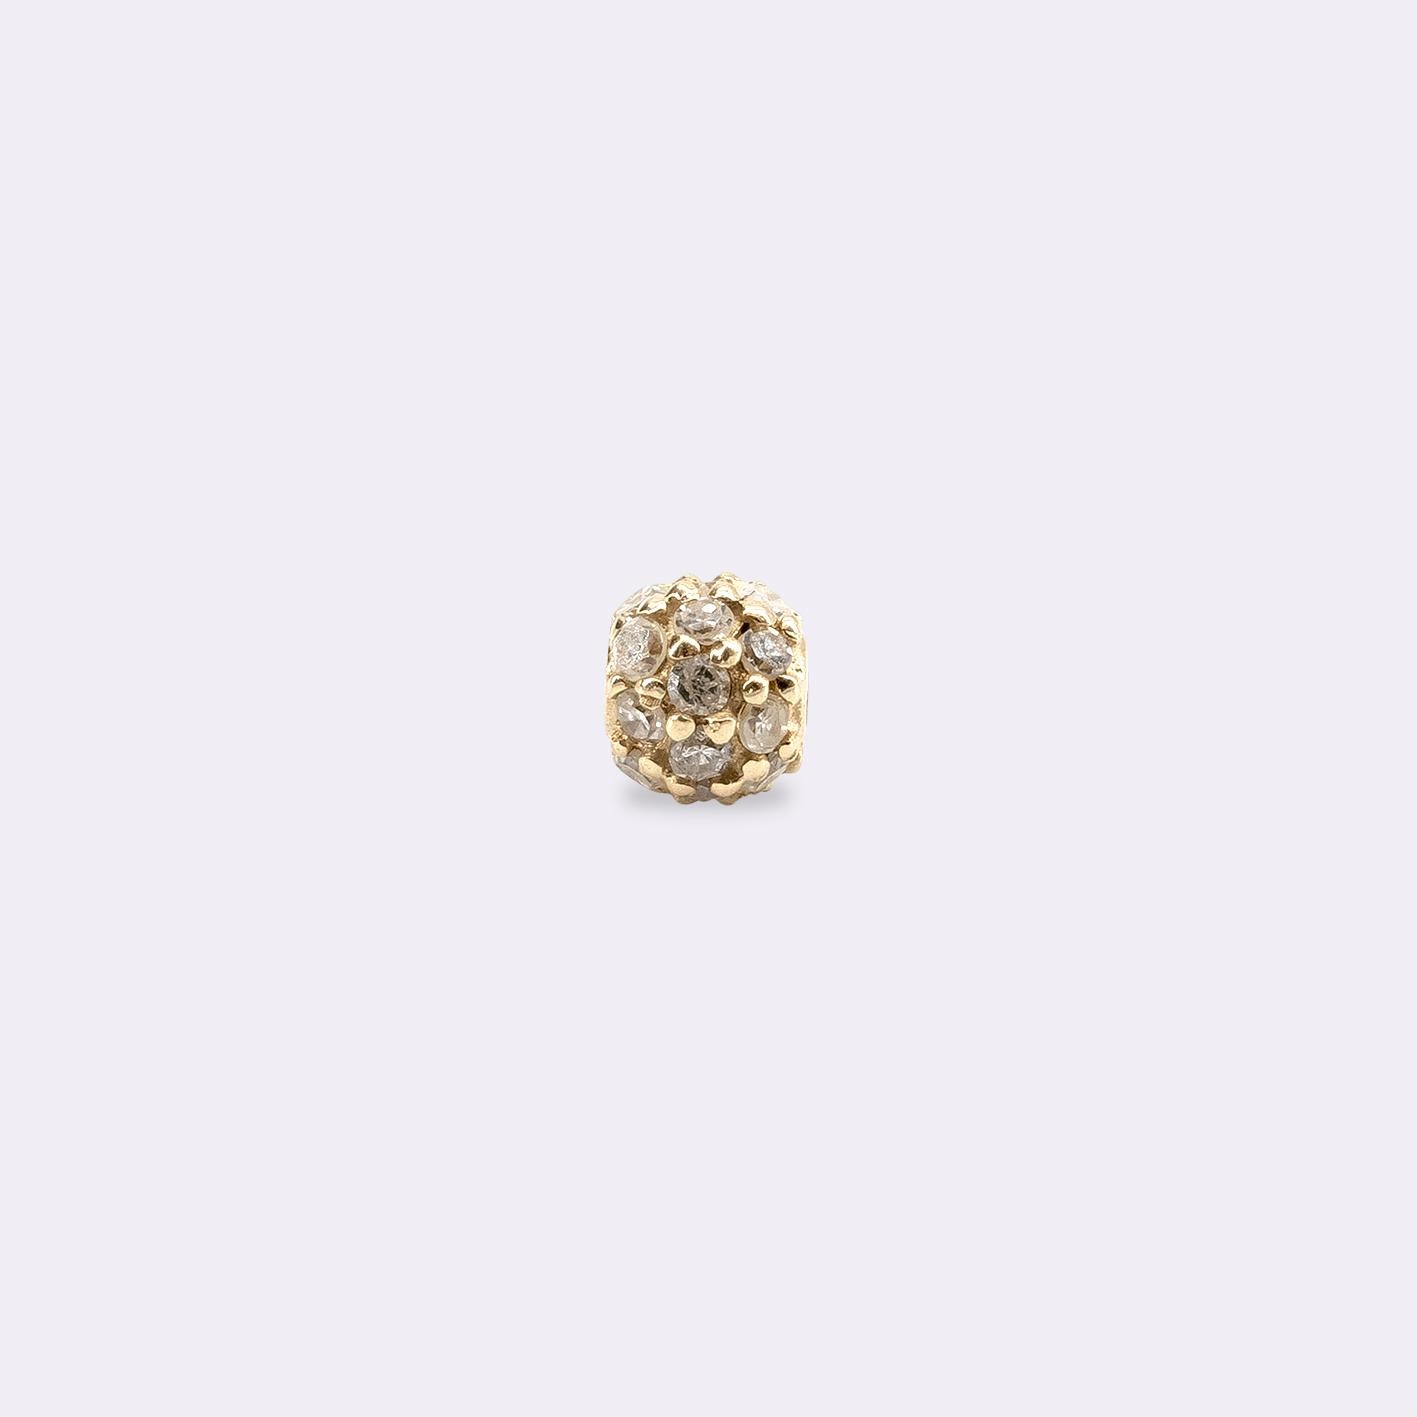 14k yellow gold
21 white diamonds
Diameter 4 mm
Rainbow nylon drawstring closure

This bracelet is a modern classic. Its concise design speaks for itself. The bracelet is barely noticeable, but the diamond ball refracts the light in an impressive